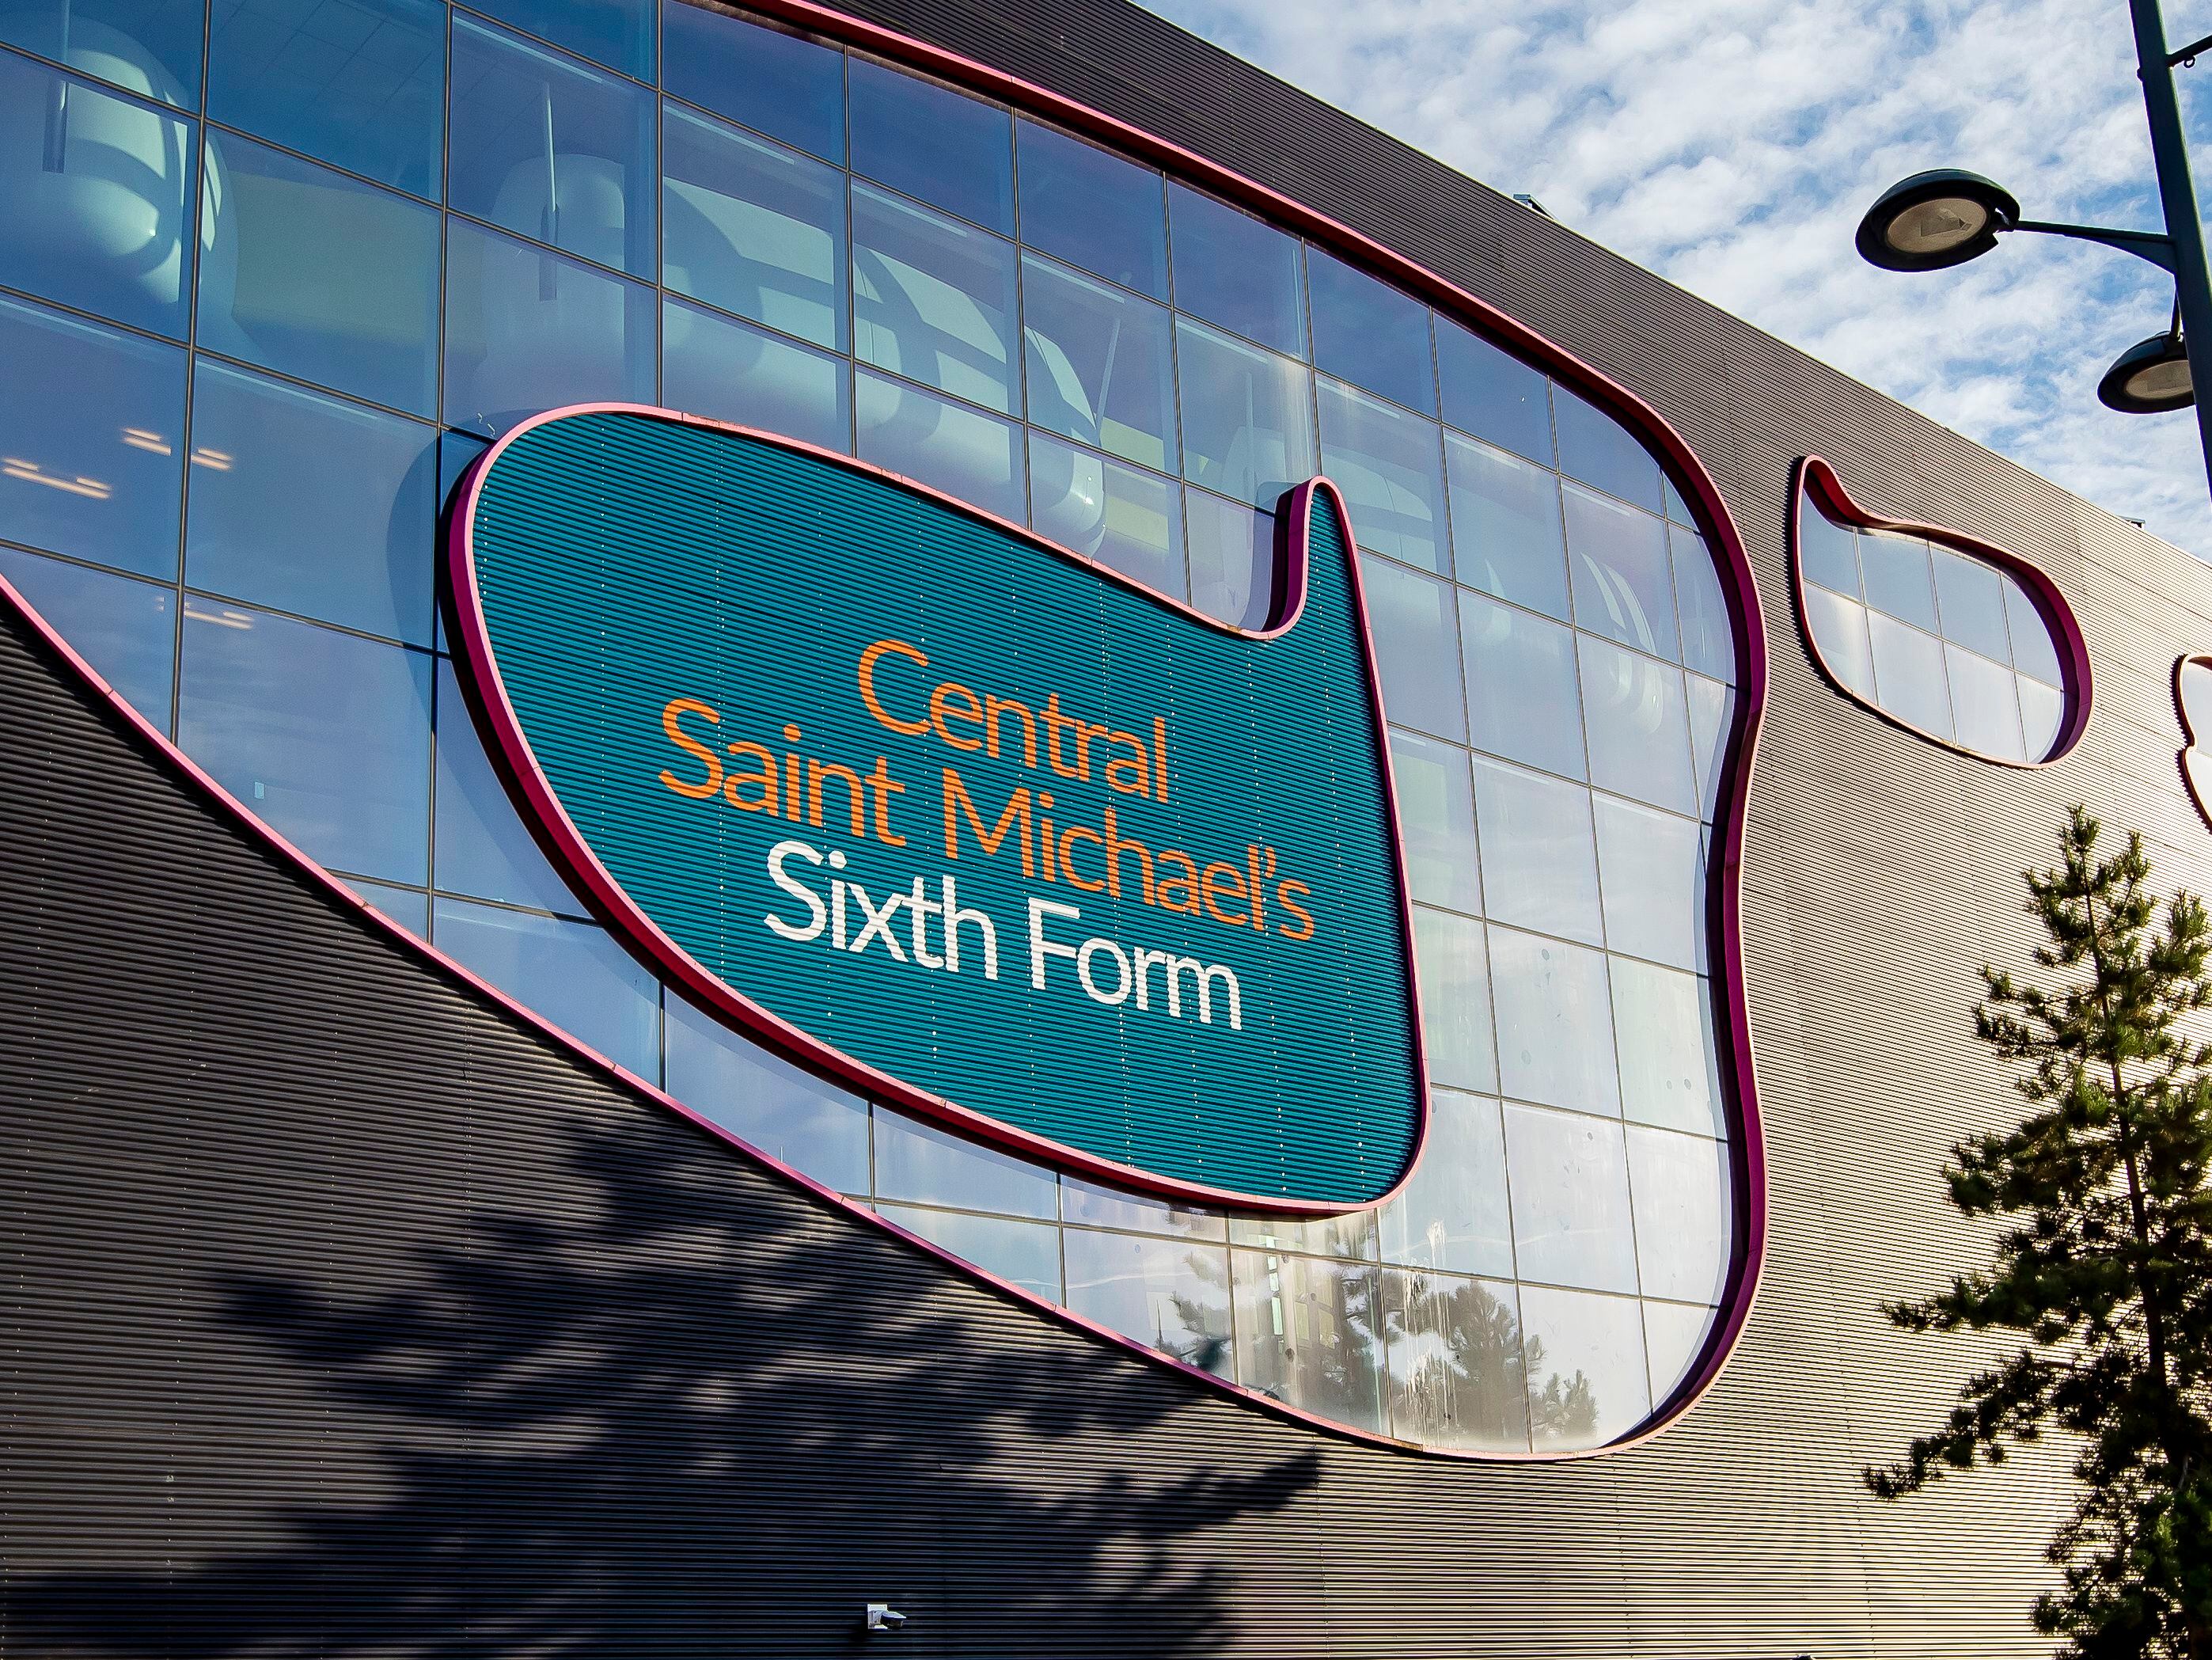 Council chiefs are backing Sandwell sixth form college expansion plans